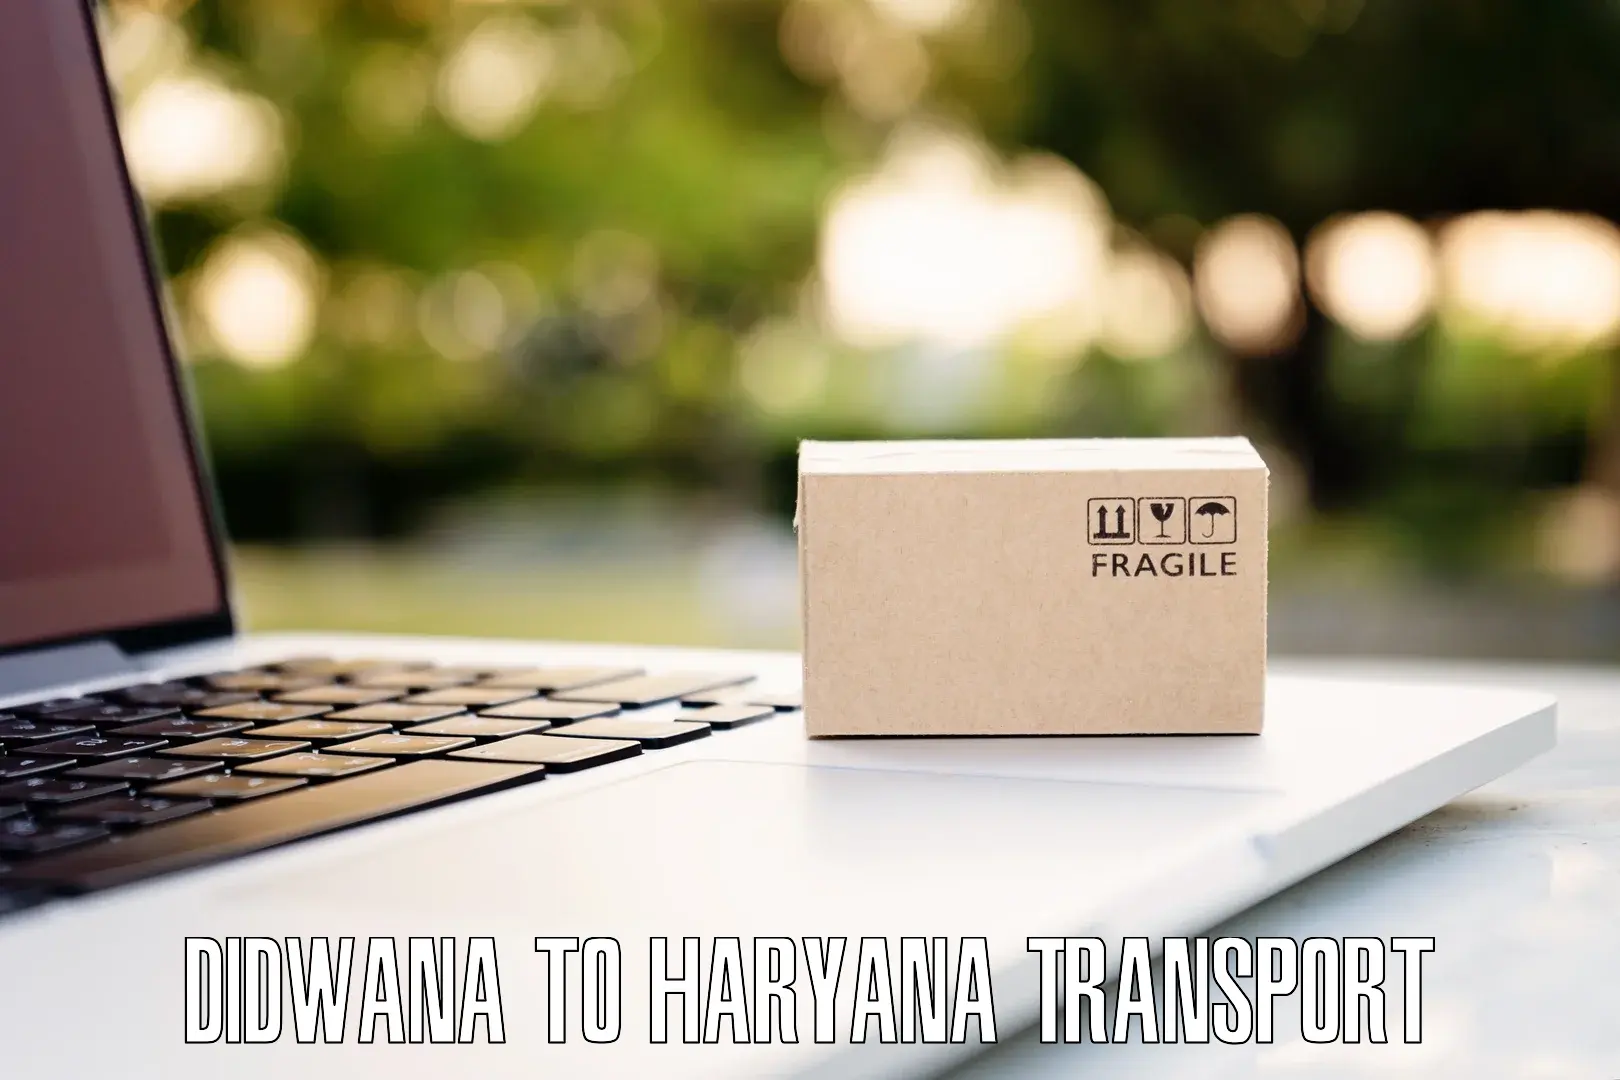 Two wheeler transport services in Didwana to NCR Haryana